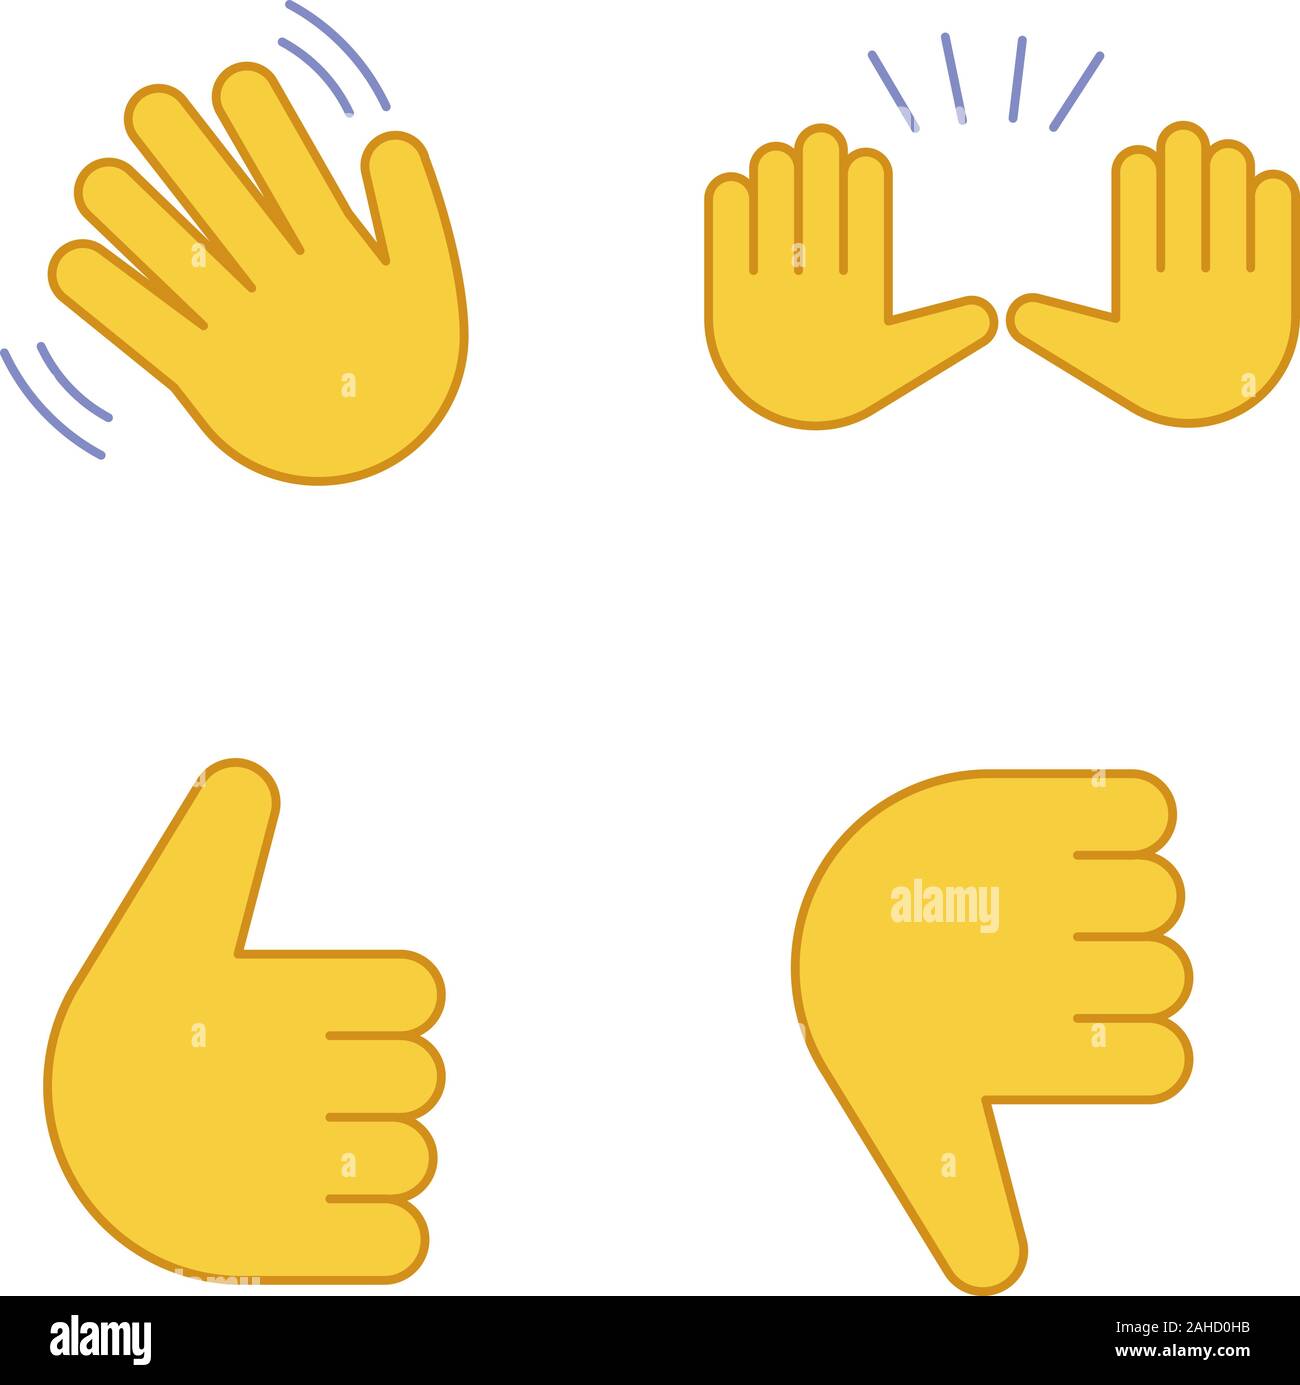 Hand Gesture Emojis Color Icons Set Hello Goodbye Stop Good Job Disapproval Gesturing Waving And Raising Hands Thumbs Up And Down Isolated Vec Stock Vector Image Art Alamy